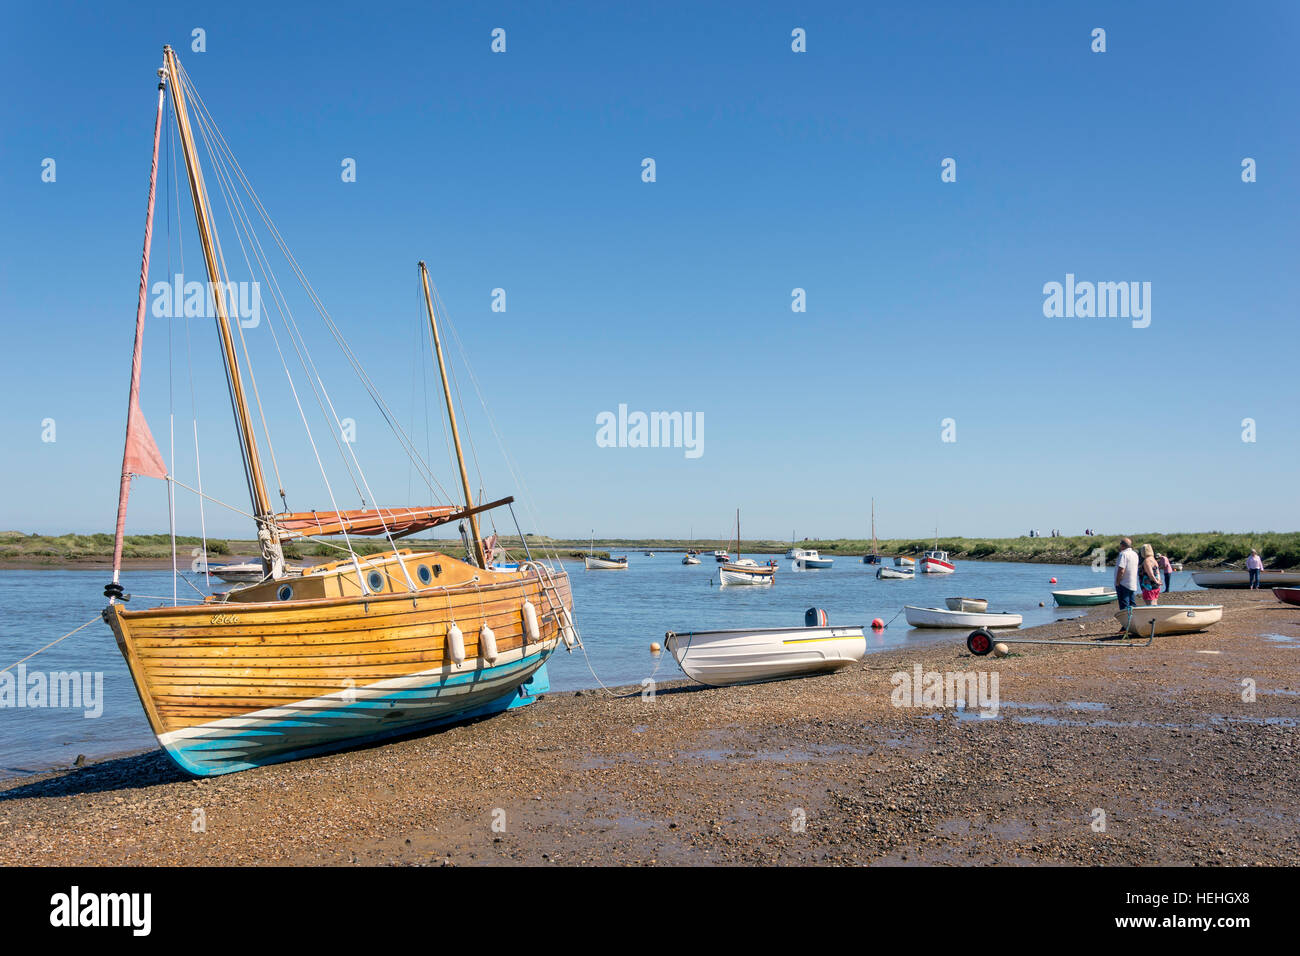 Traditional sailing boats on River Burn from The Quay, Burnham Overy Staithe, Norfolk, England, United Kingdom Stock Photo